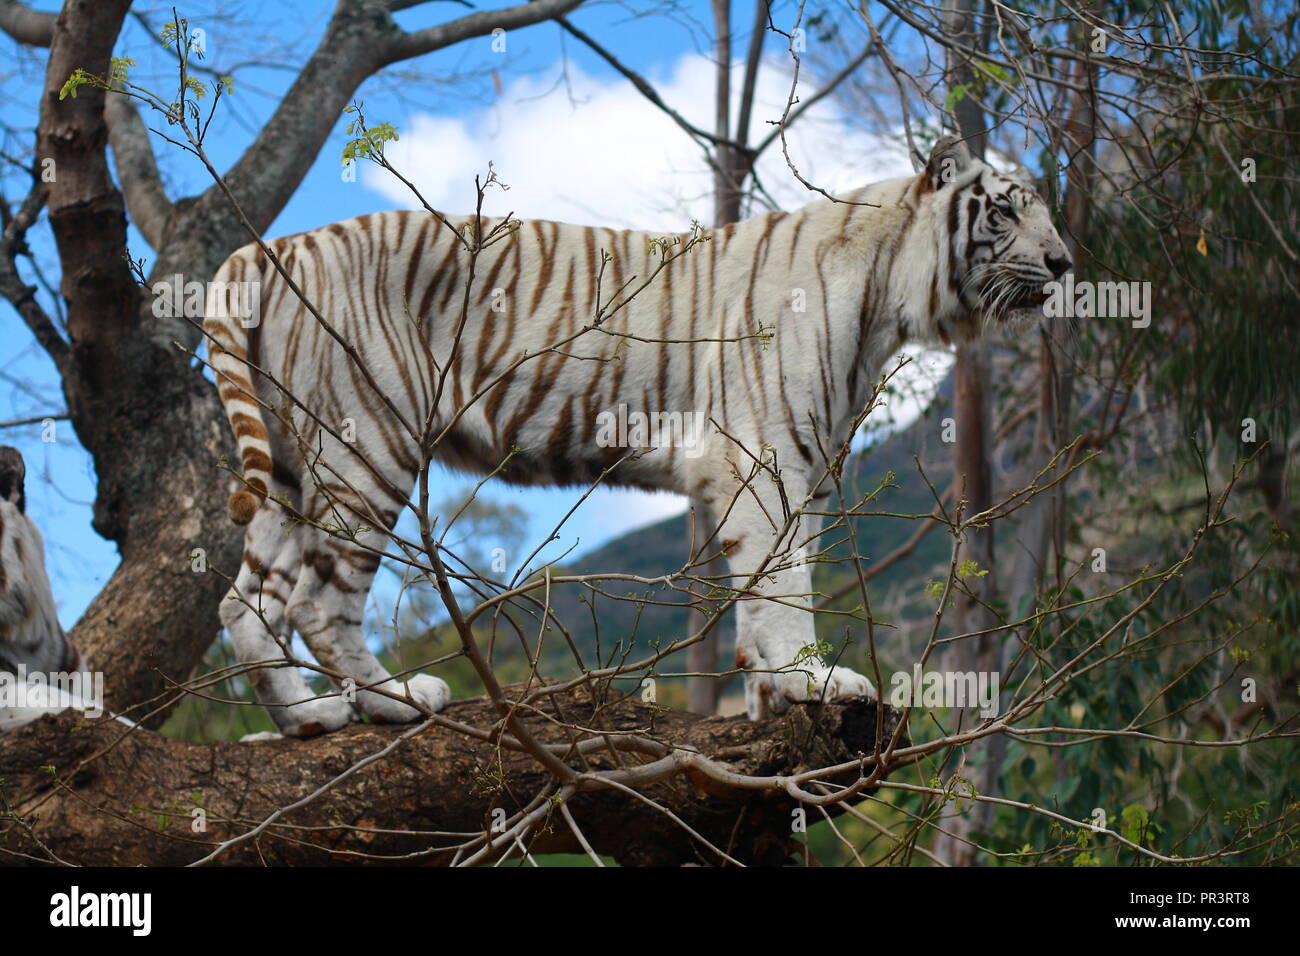 White skinned tiger on a tree. Stock Photo